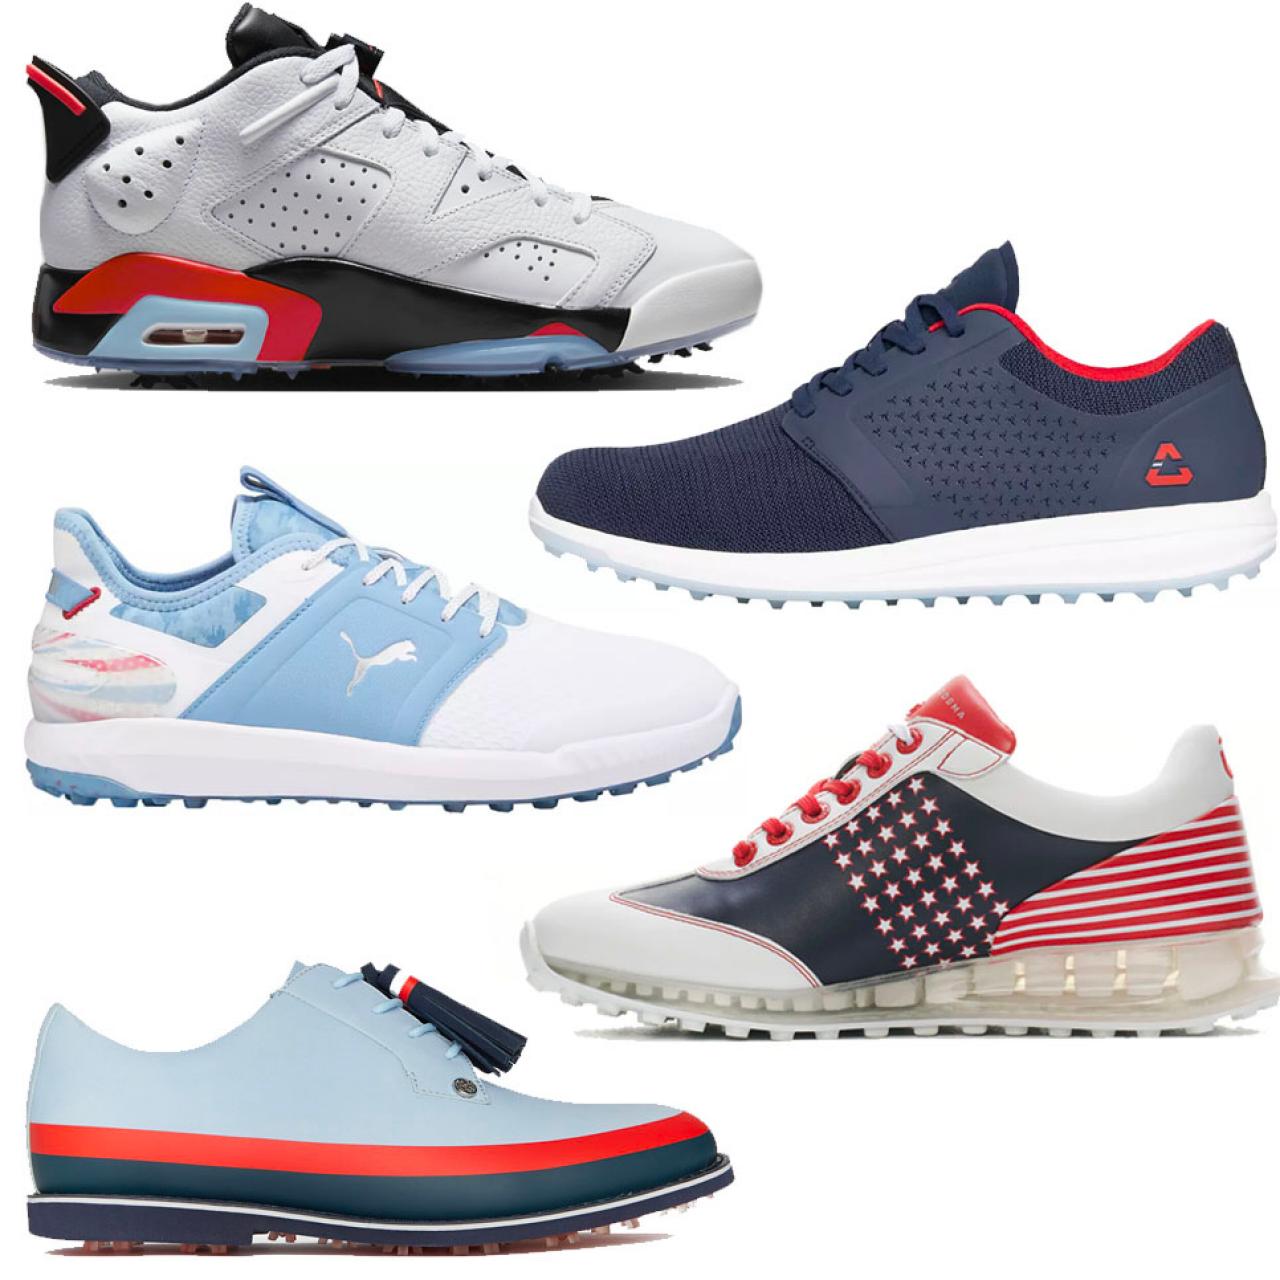 10 USA-themed golf shoes that are as stylish as they are patriotic